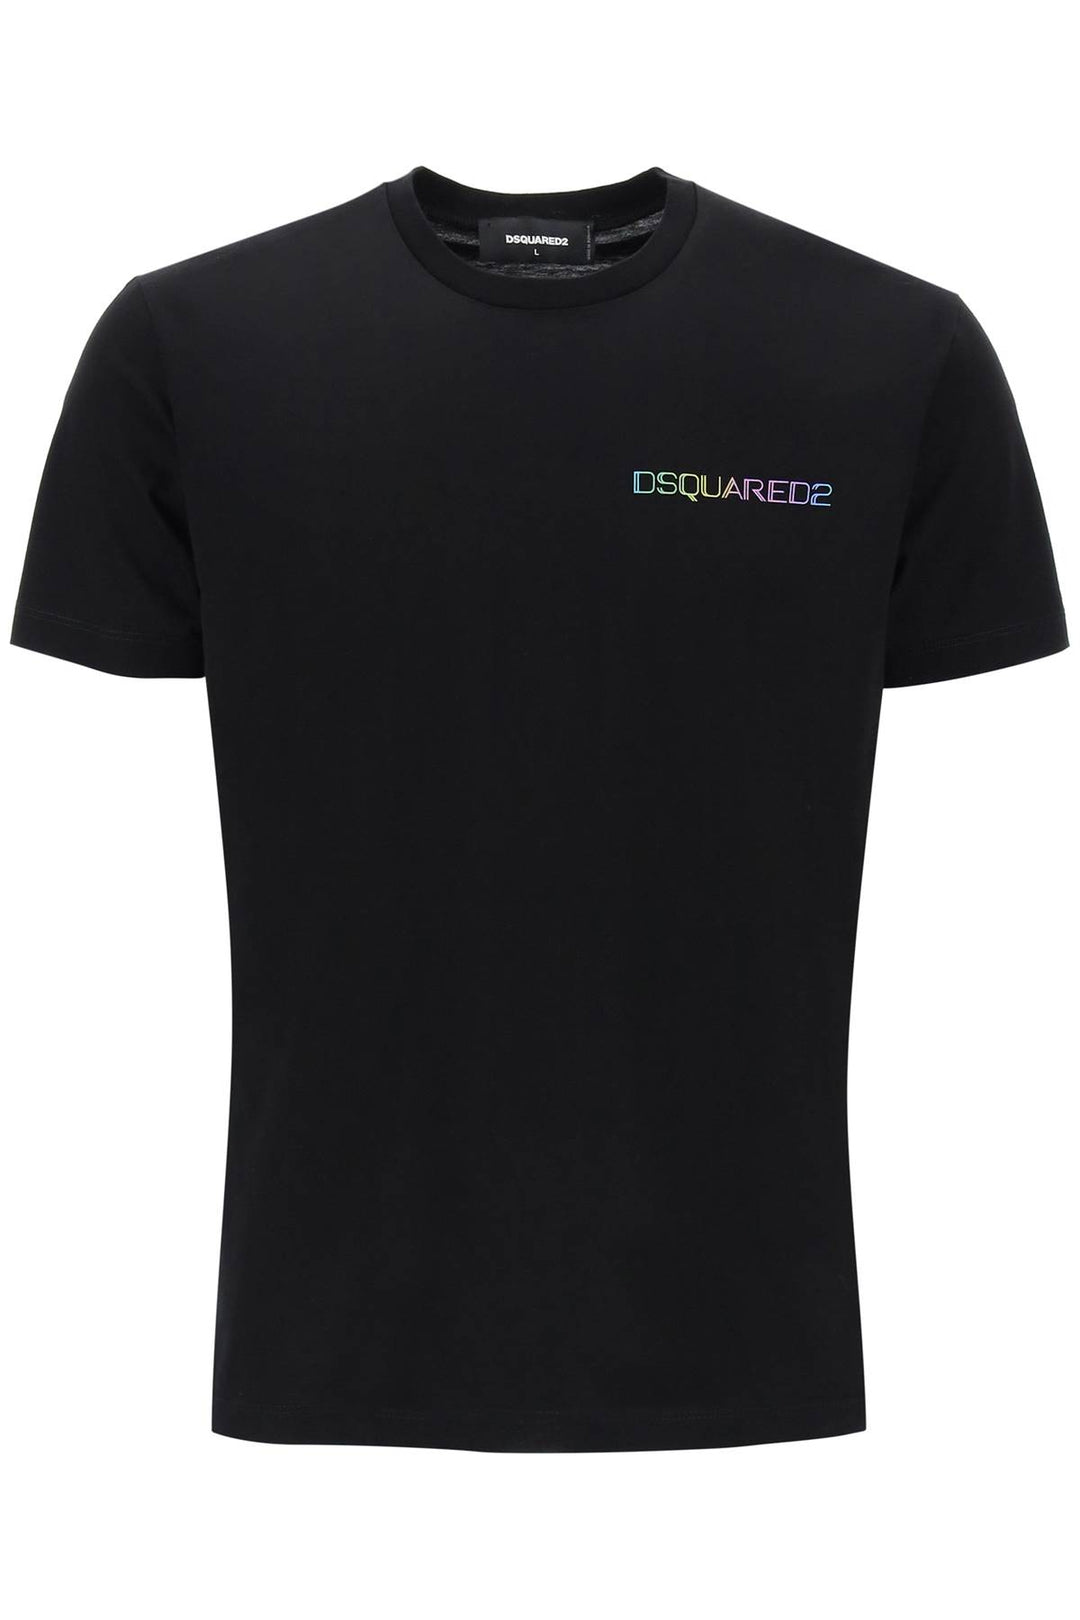 Dsquared2 Printed Cool Fit T Shirt   Nero